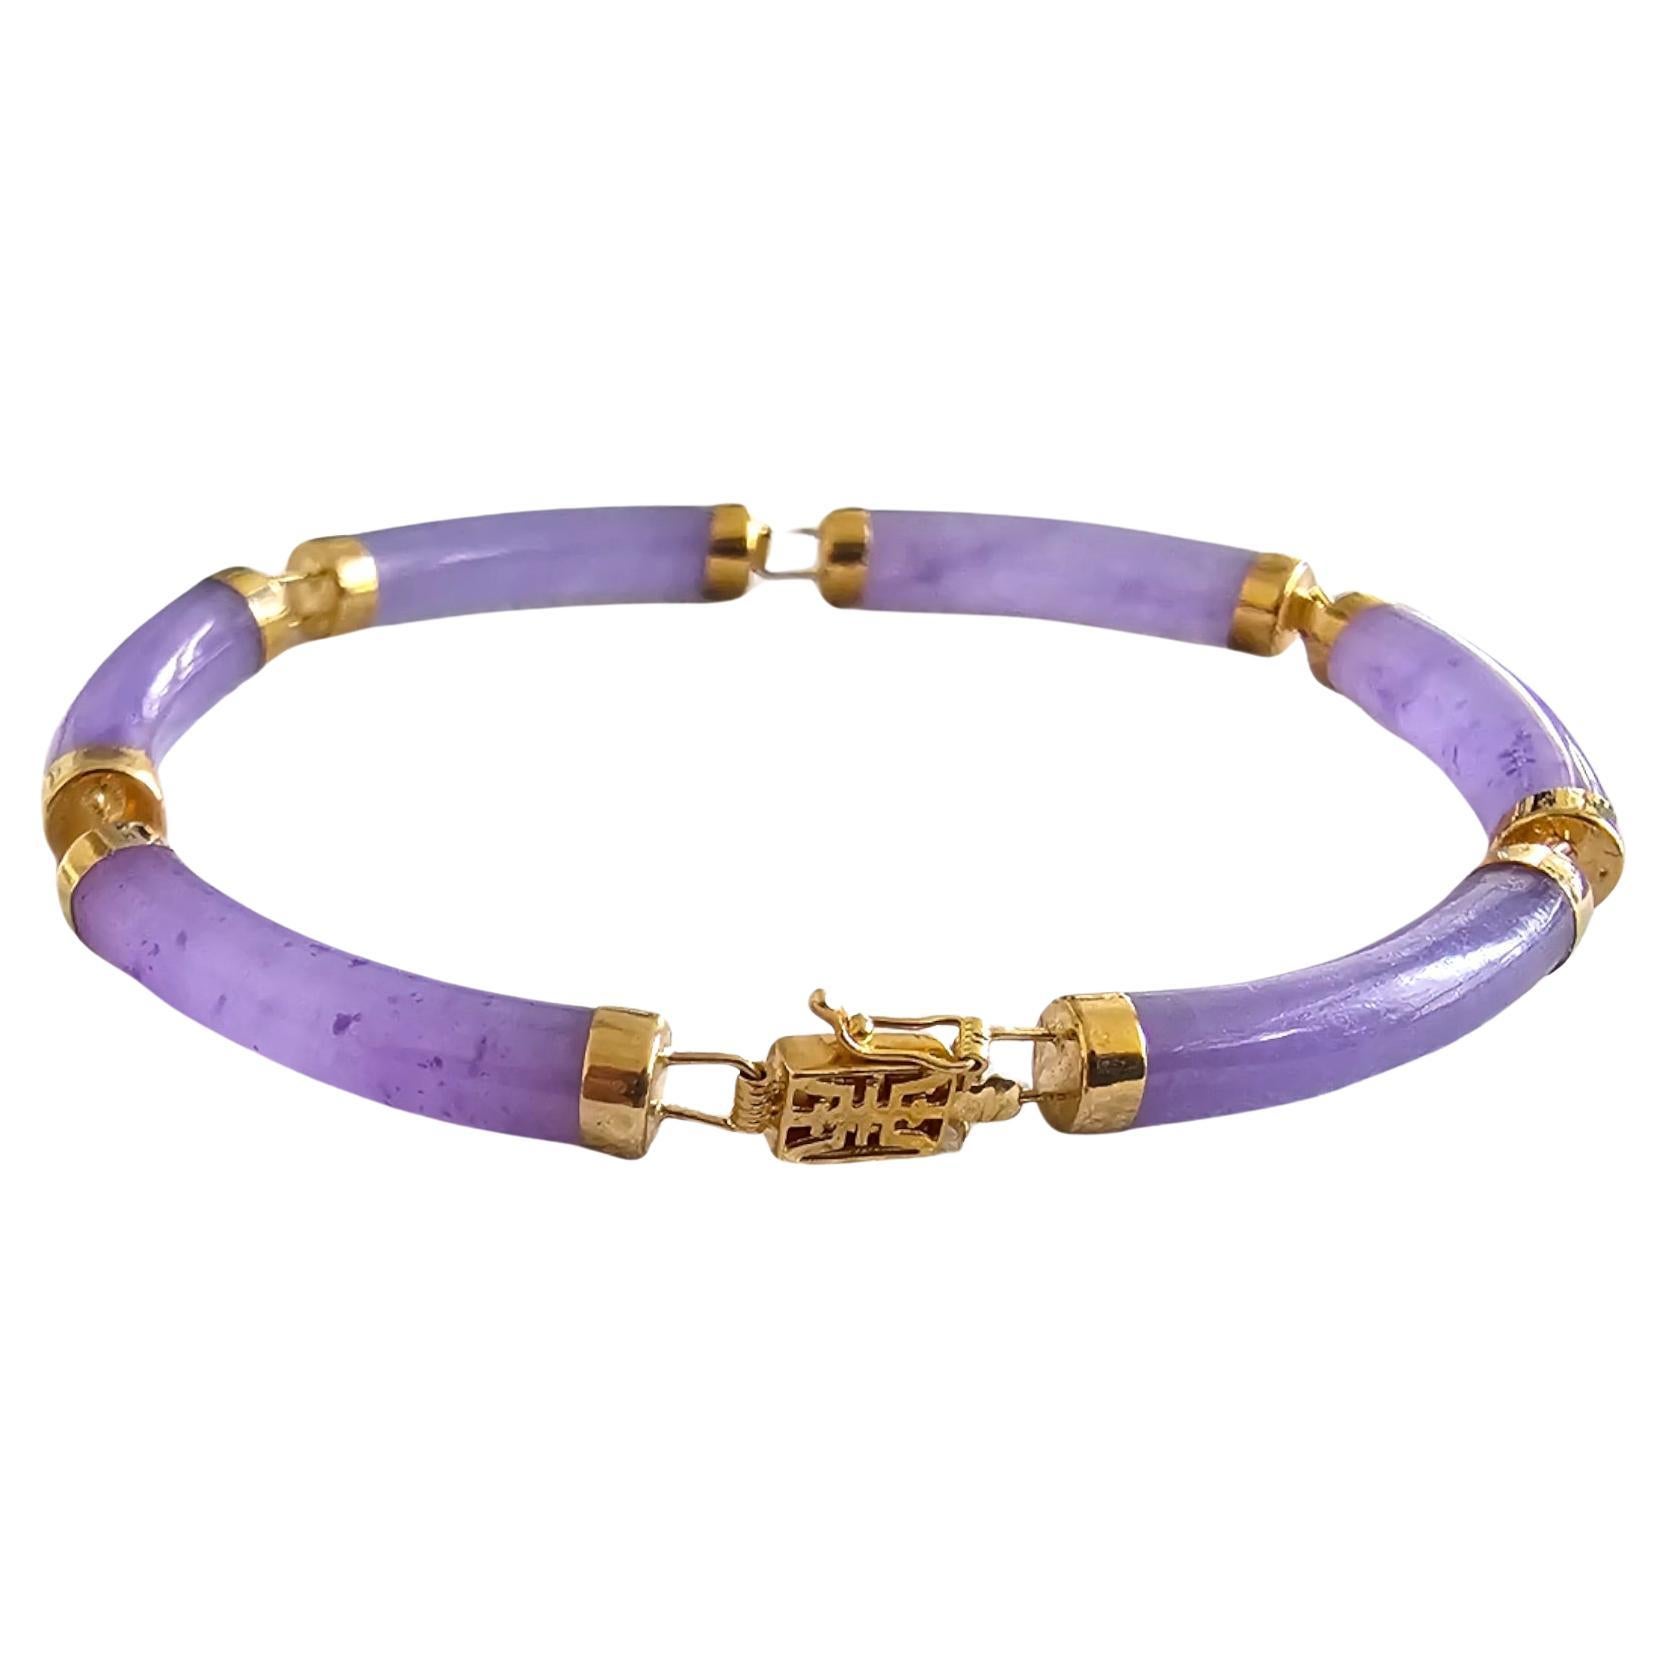 Fortune Purple Jadeite Tube Bars Bracelet with 14K Solid Yellow Gold links/clasp